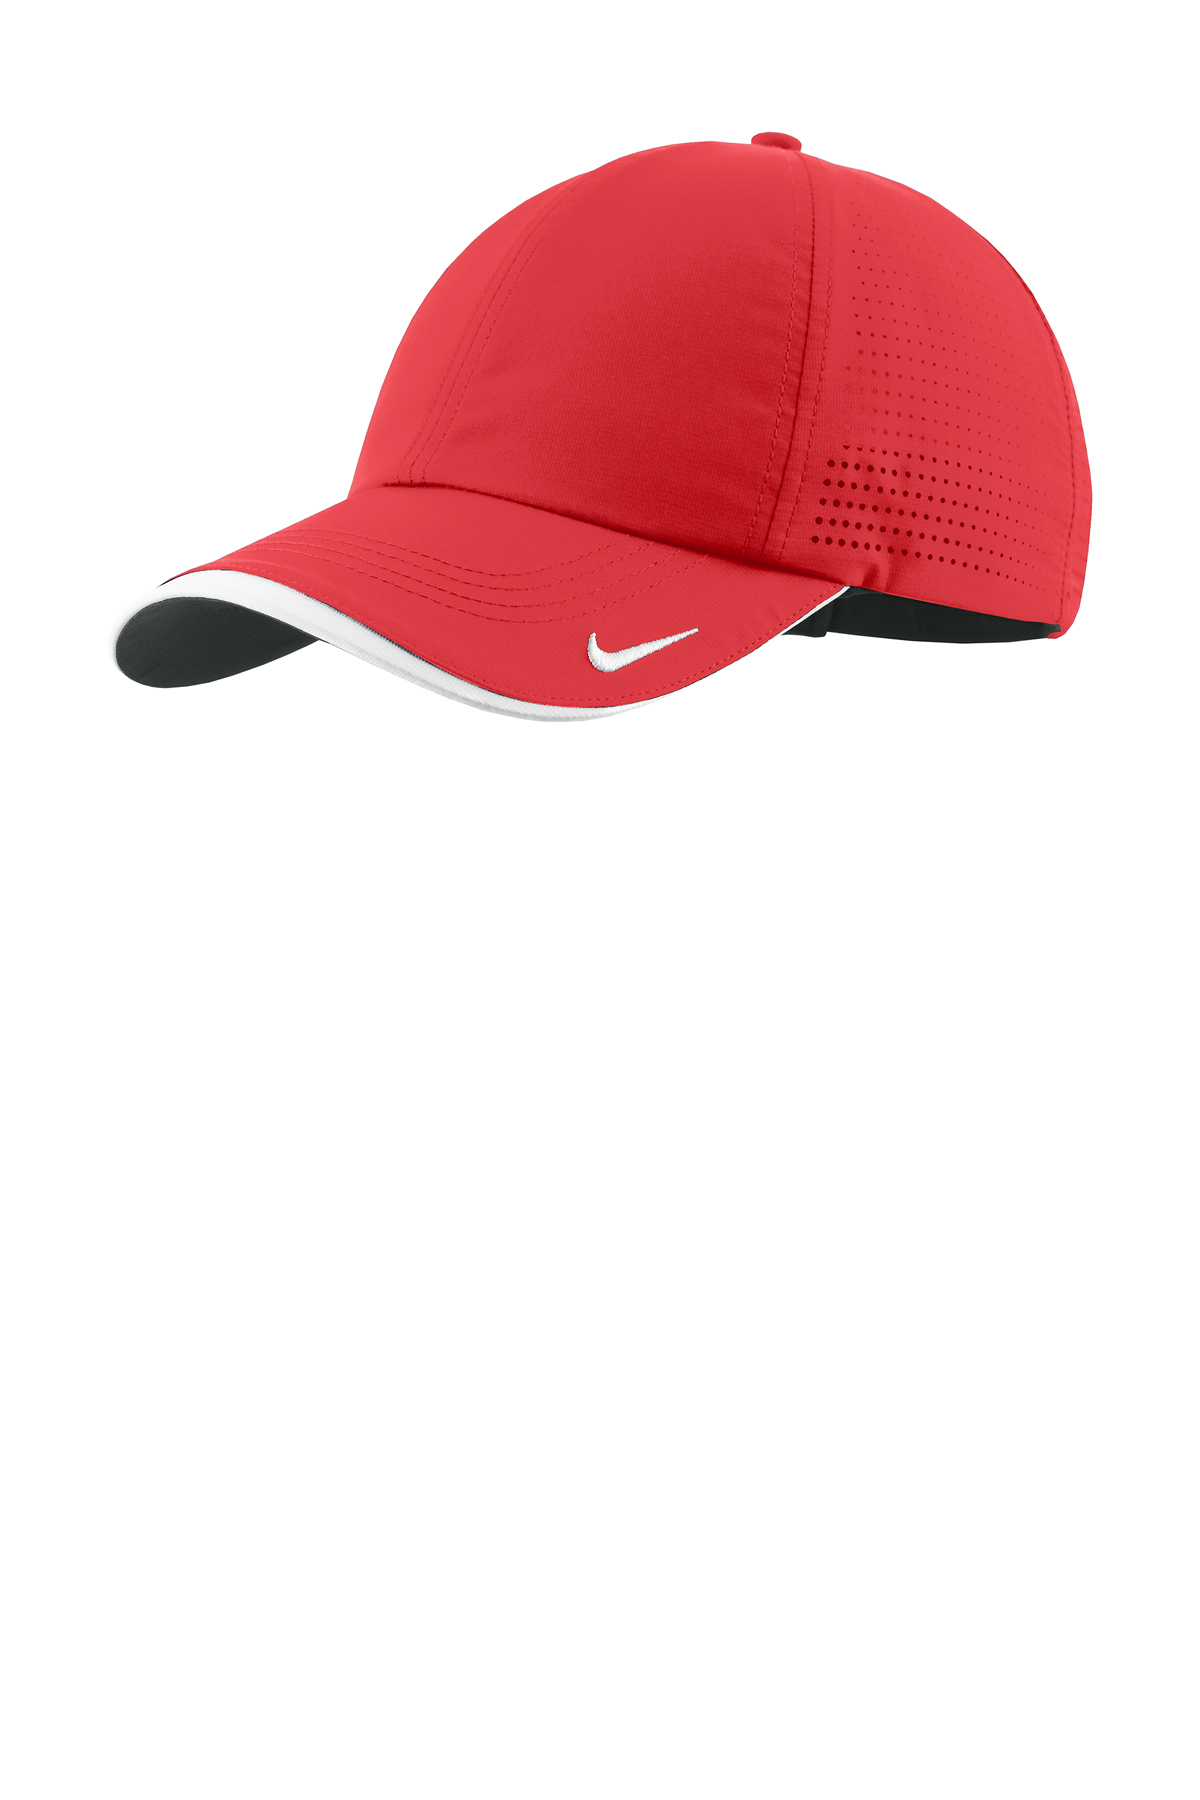 Nike Golf Youth Performance Adjustable Hat - Pink